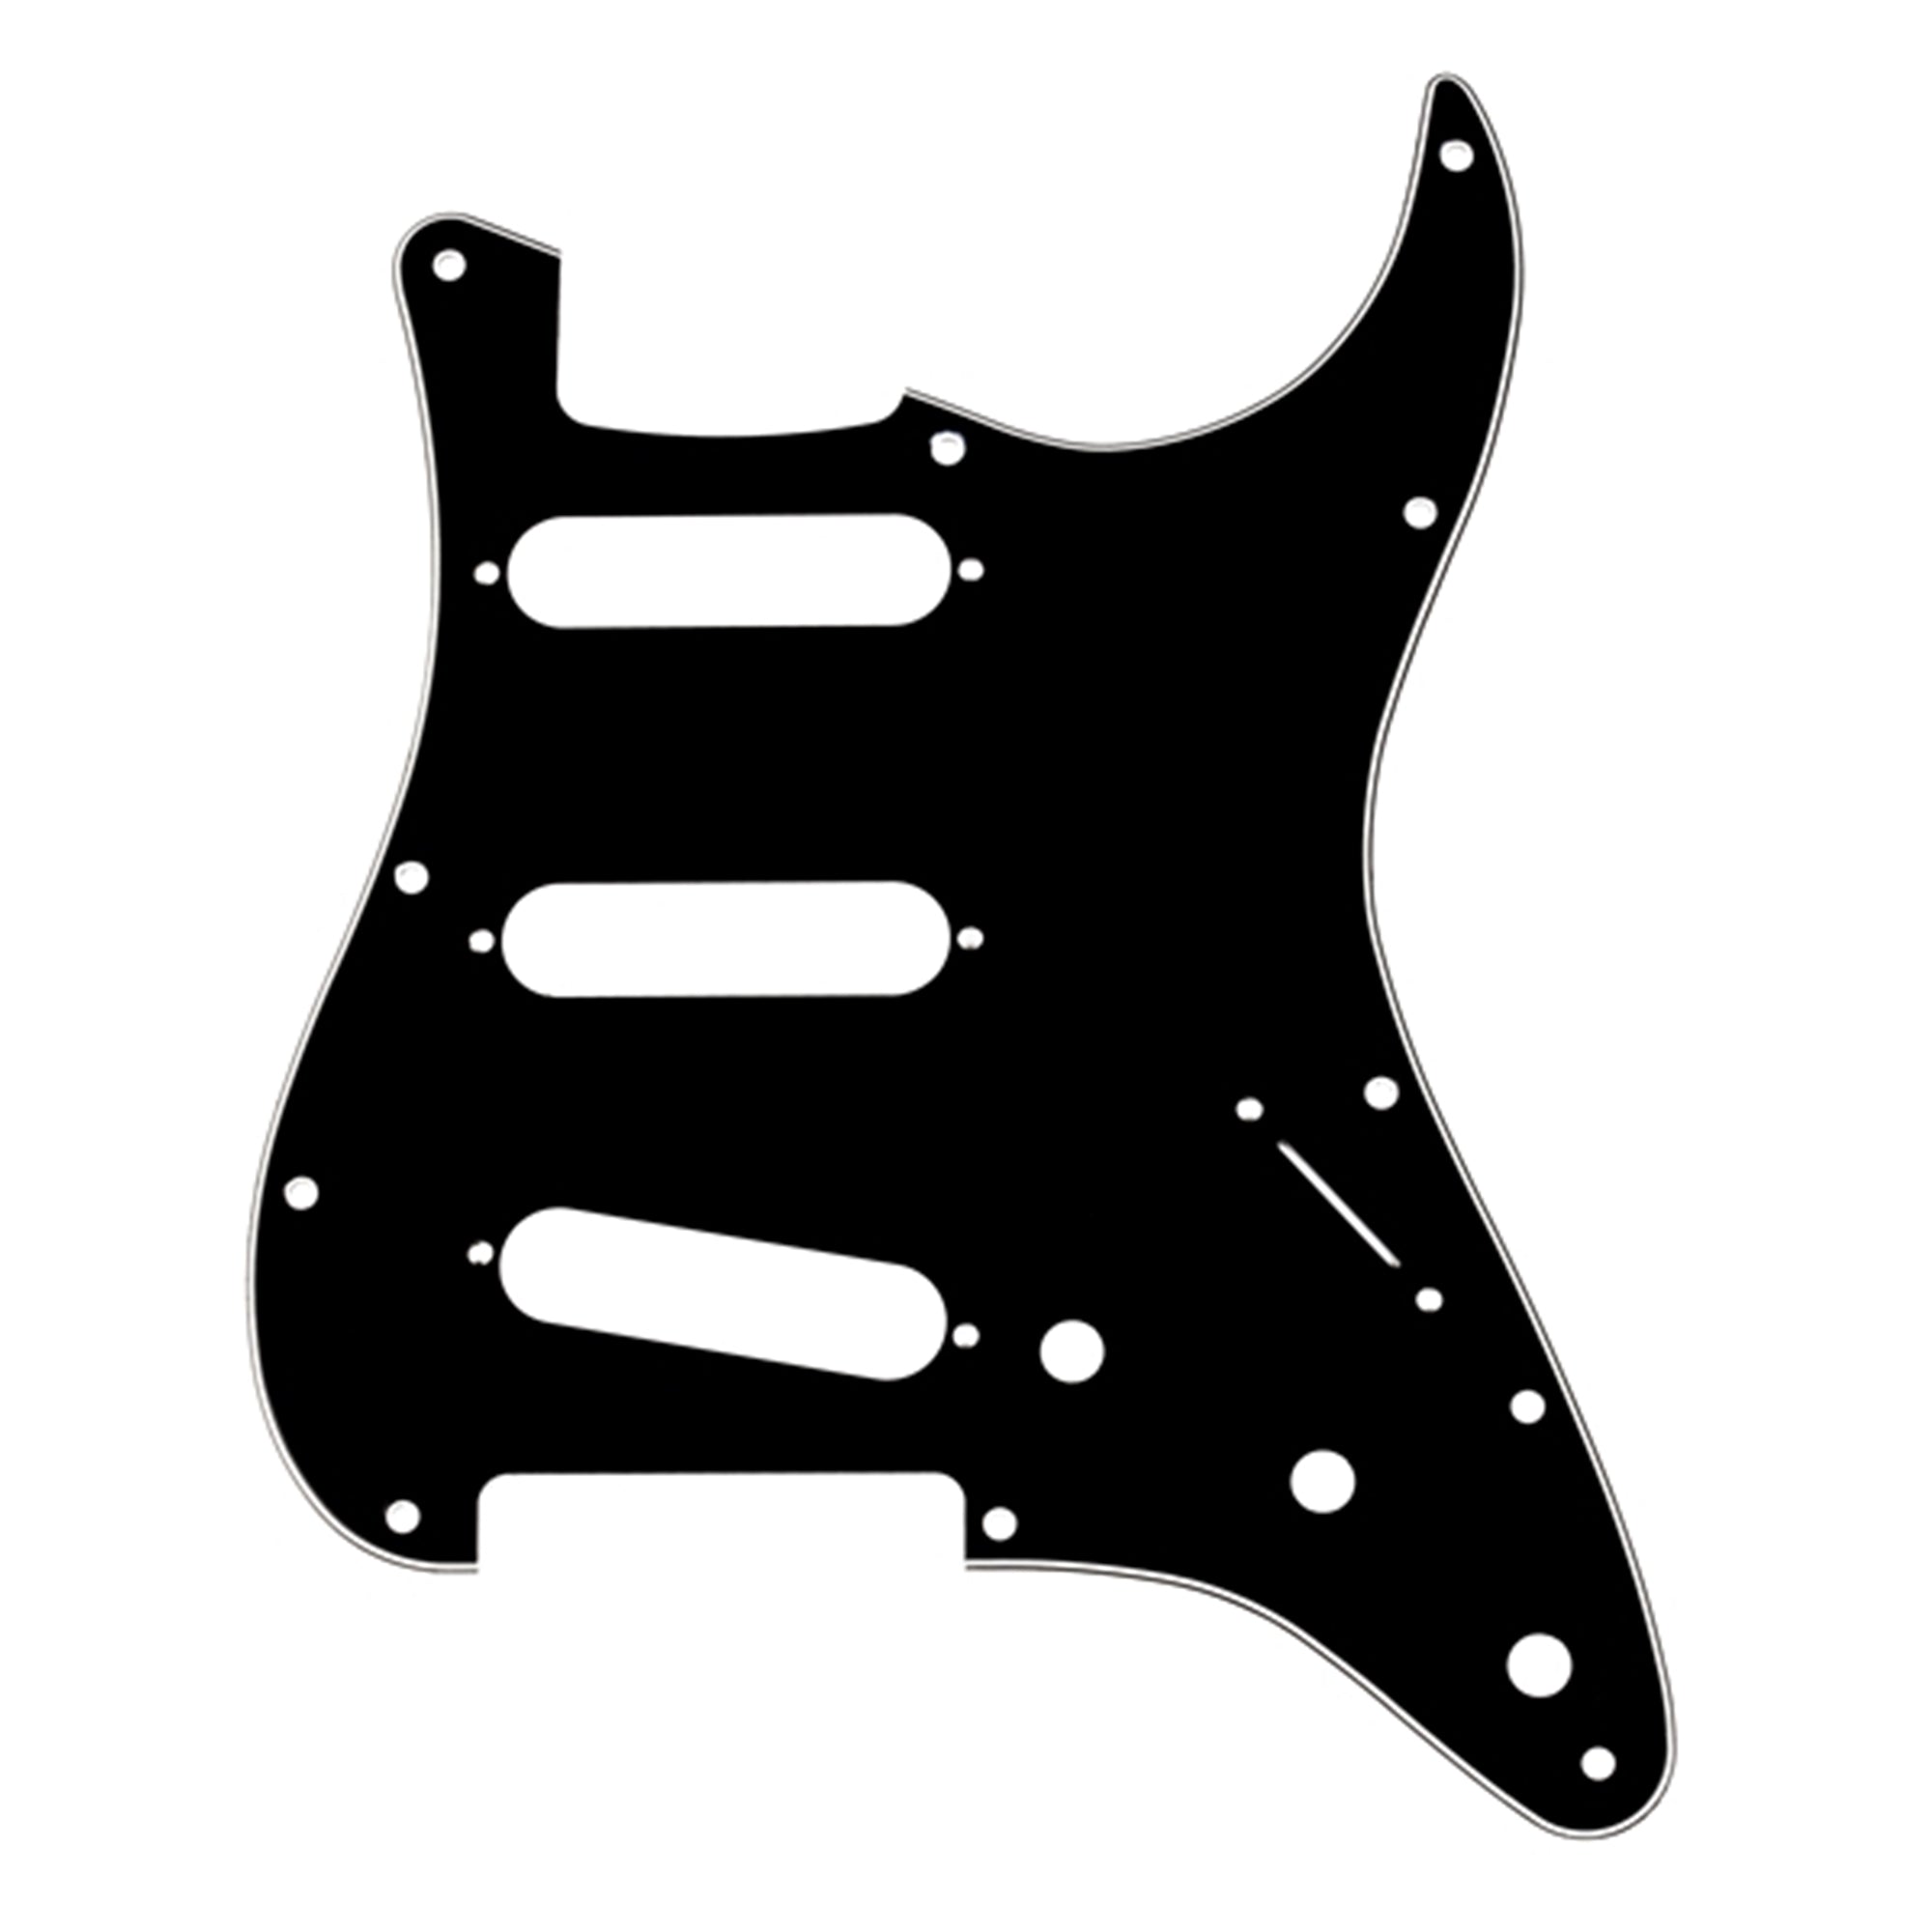 FENDER #0991359000 Pickguard, Stratocaster S/S/S, 11-Hole Mount, B/W/B, 3-Ply